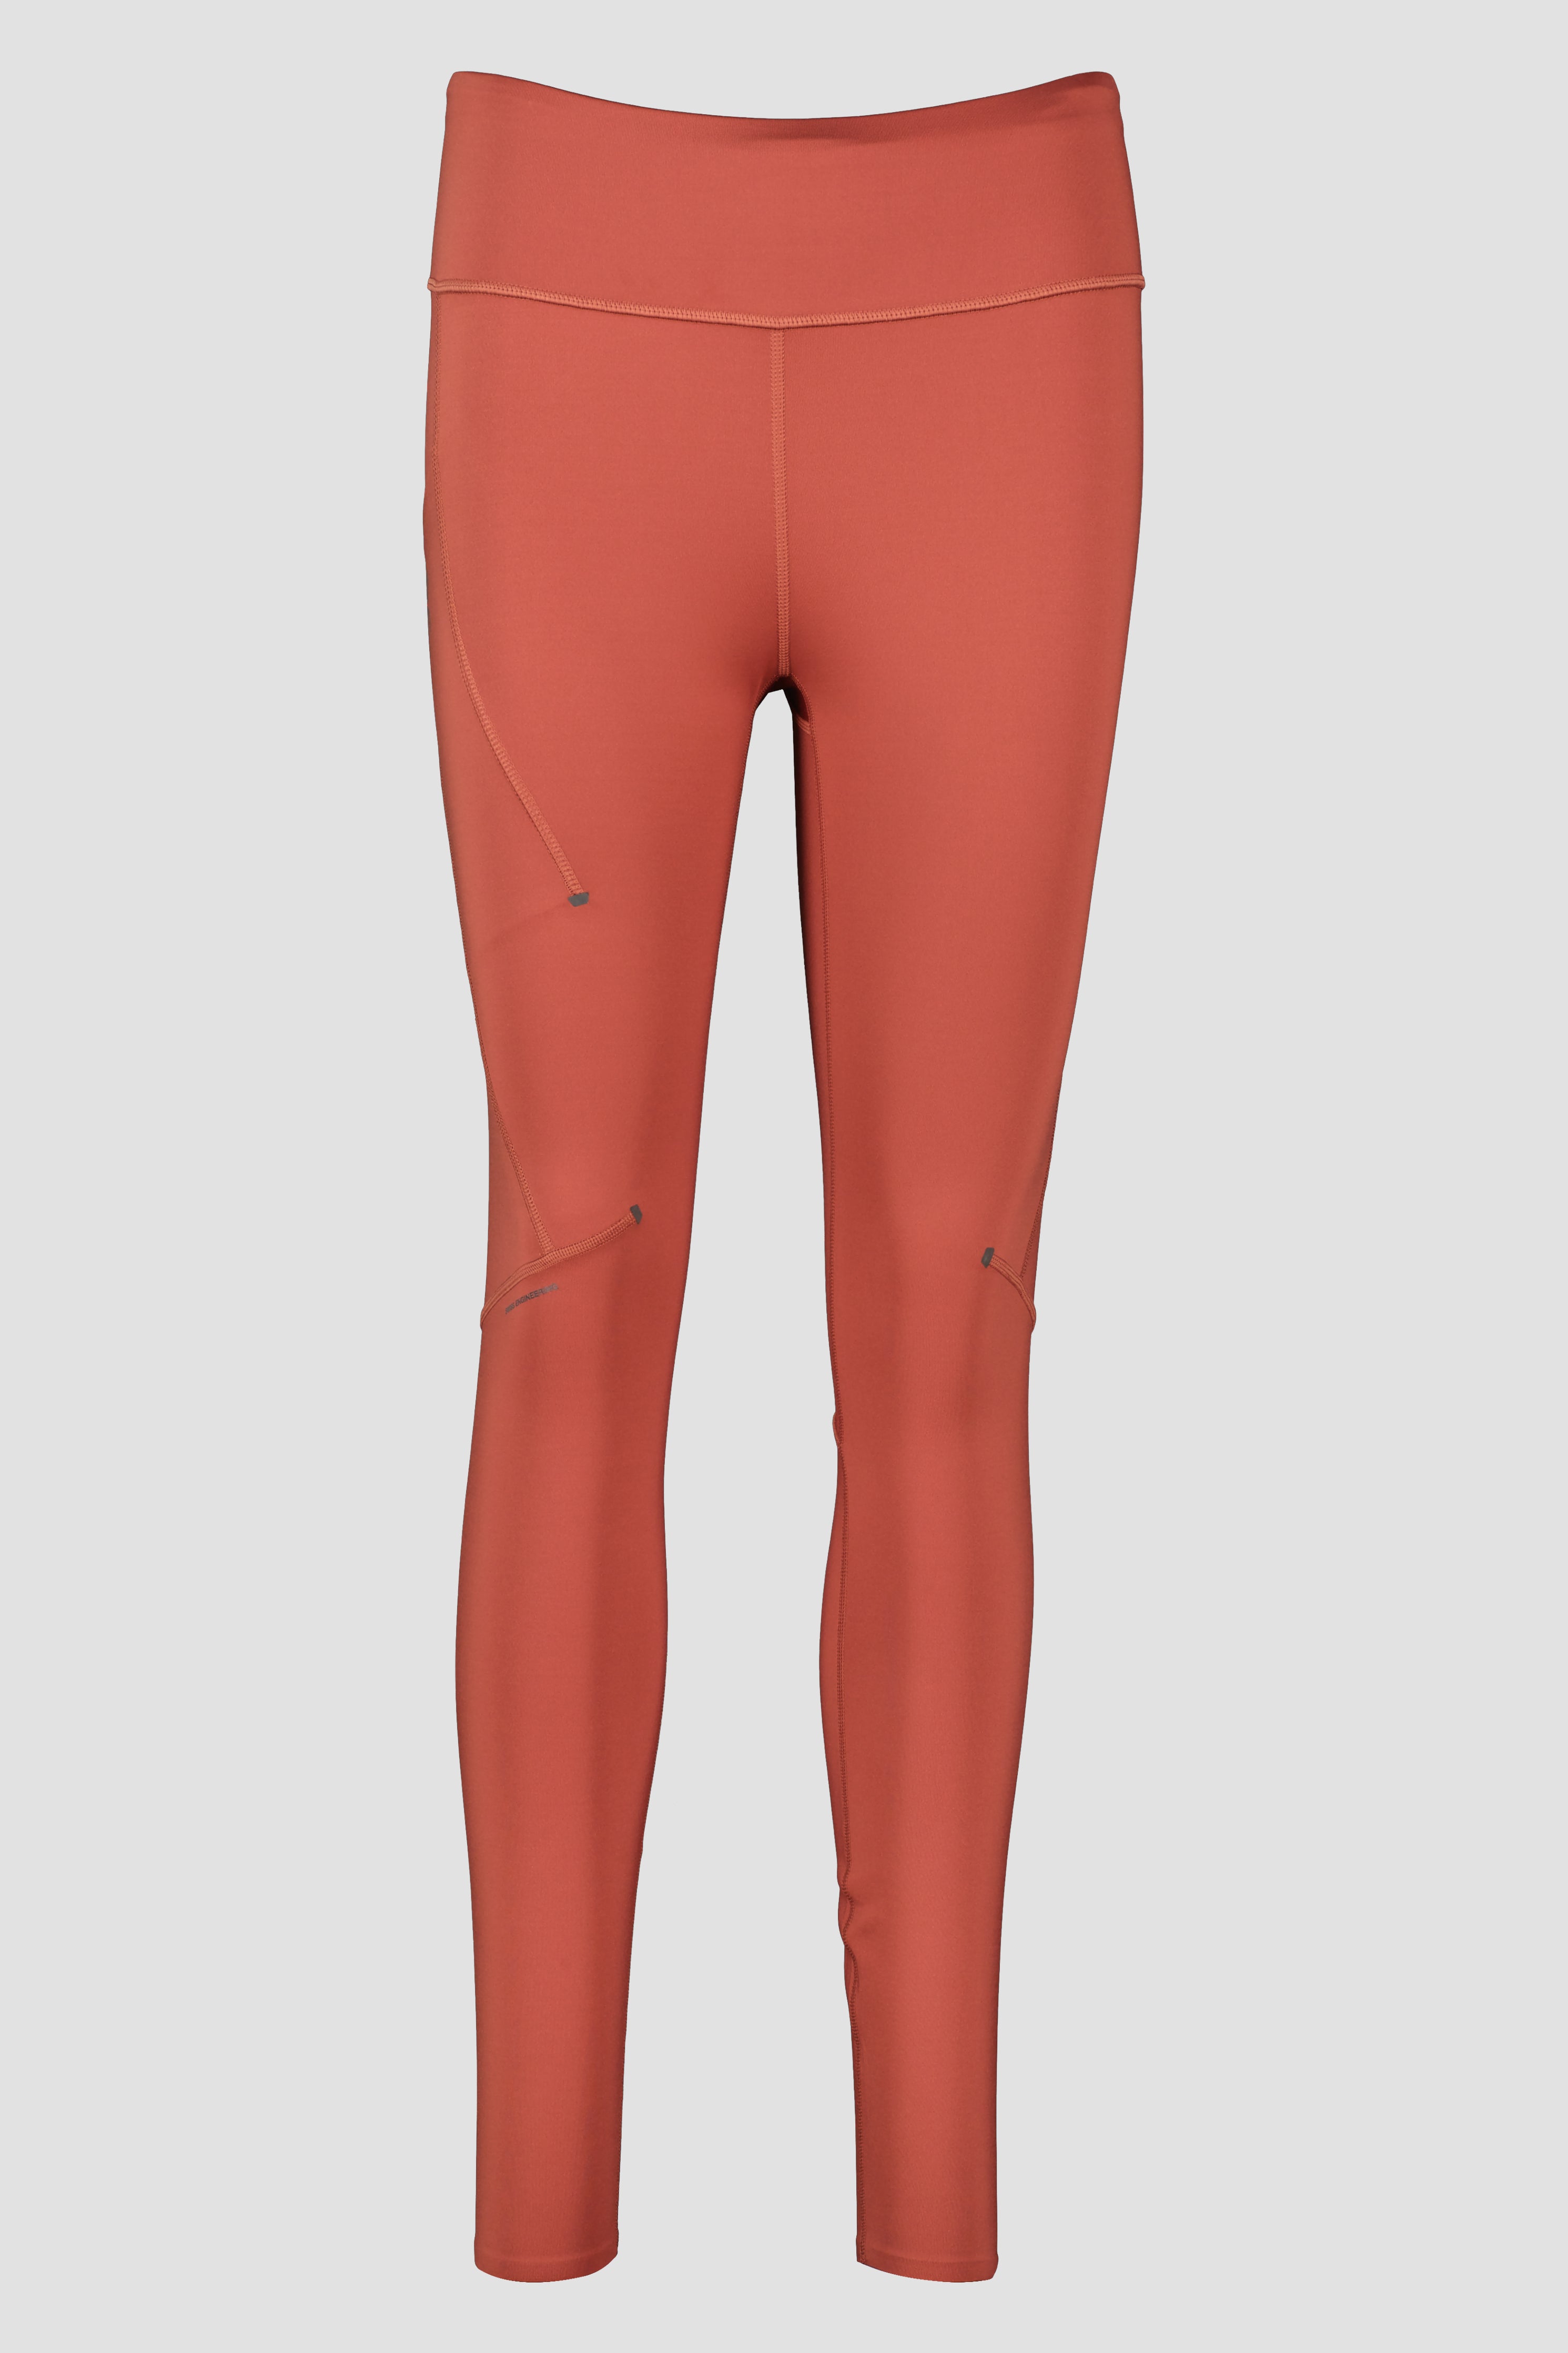 Women's On Running Ruby Performance Tights